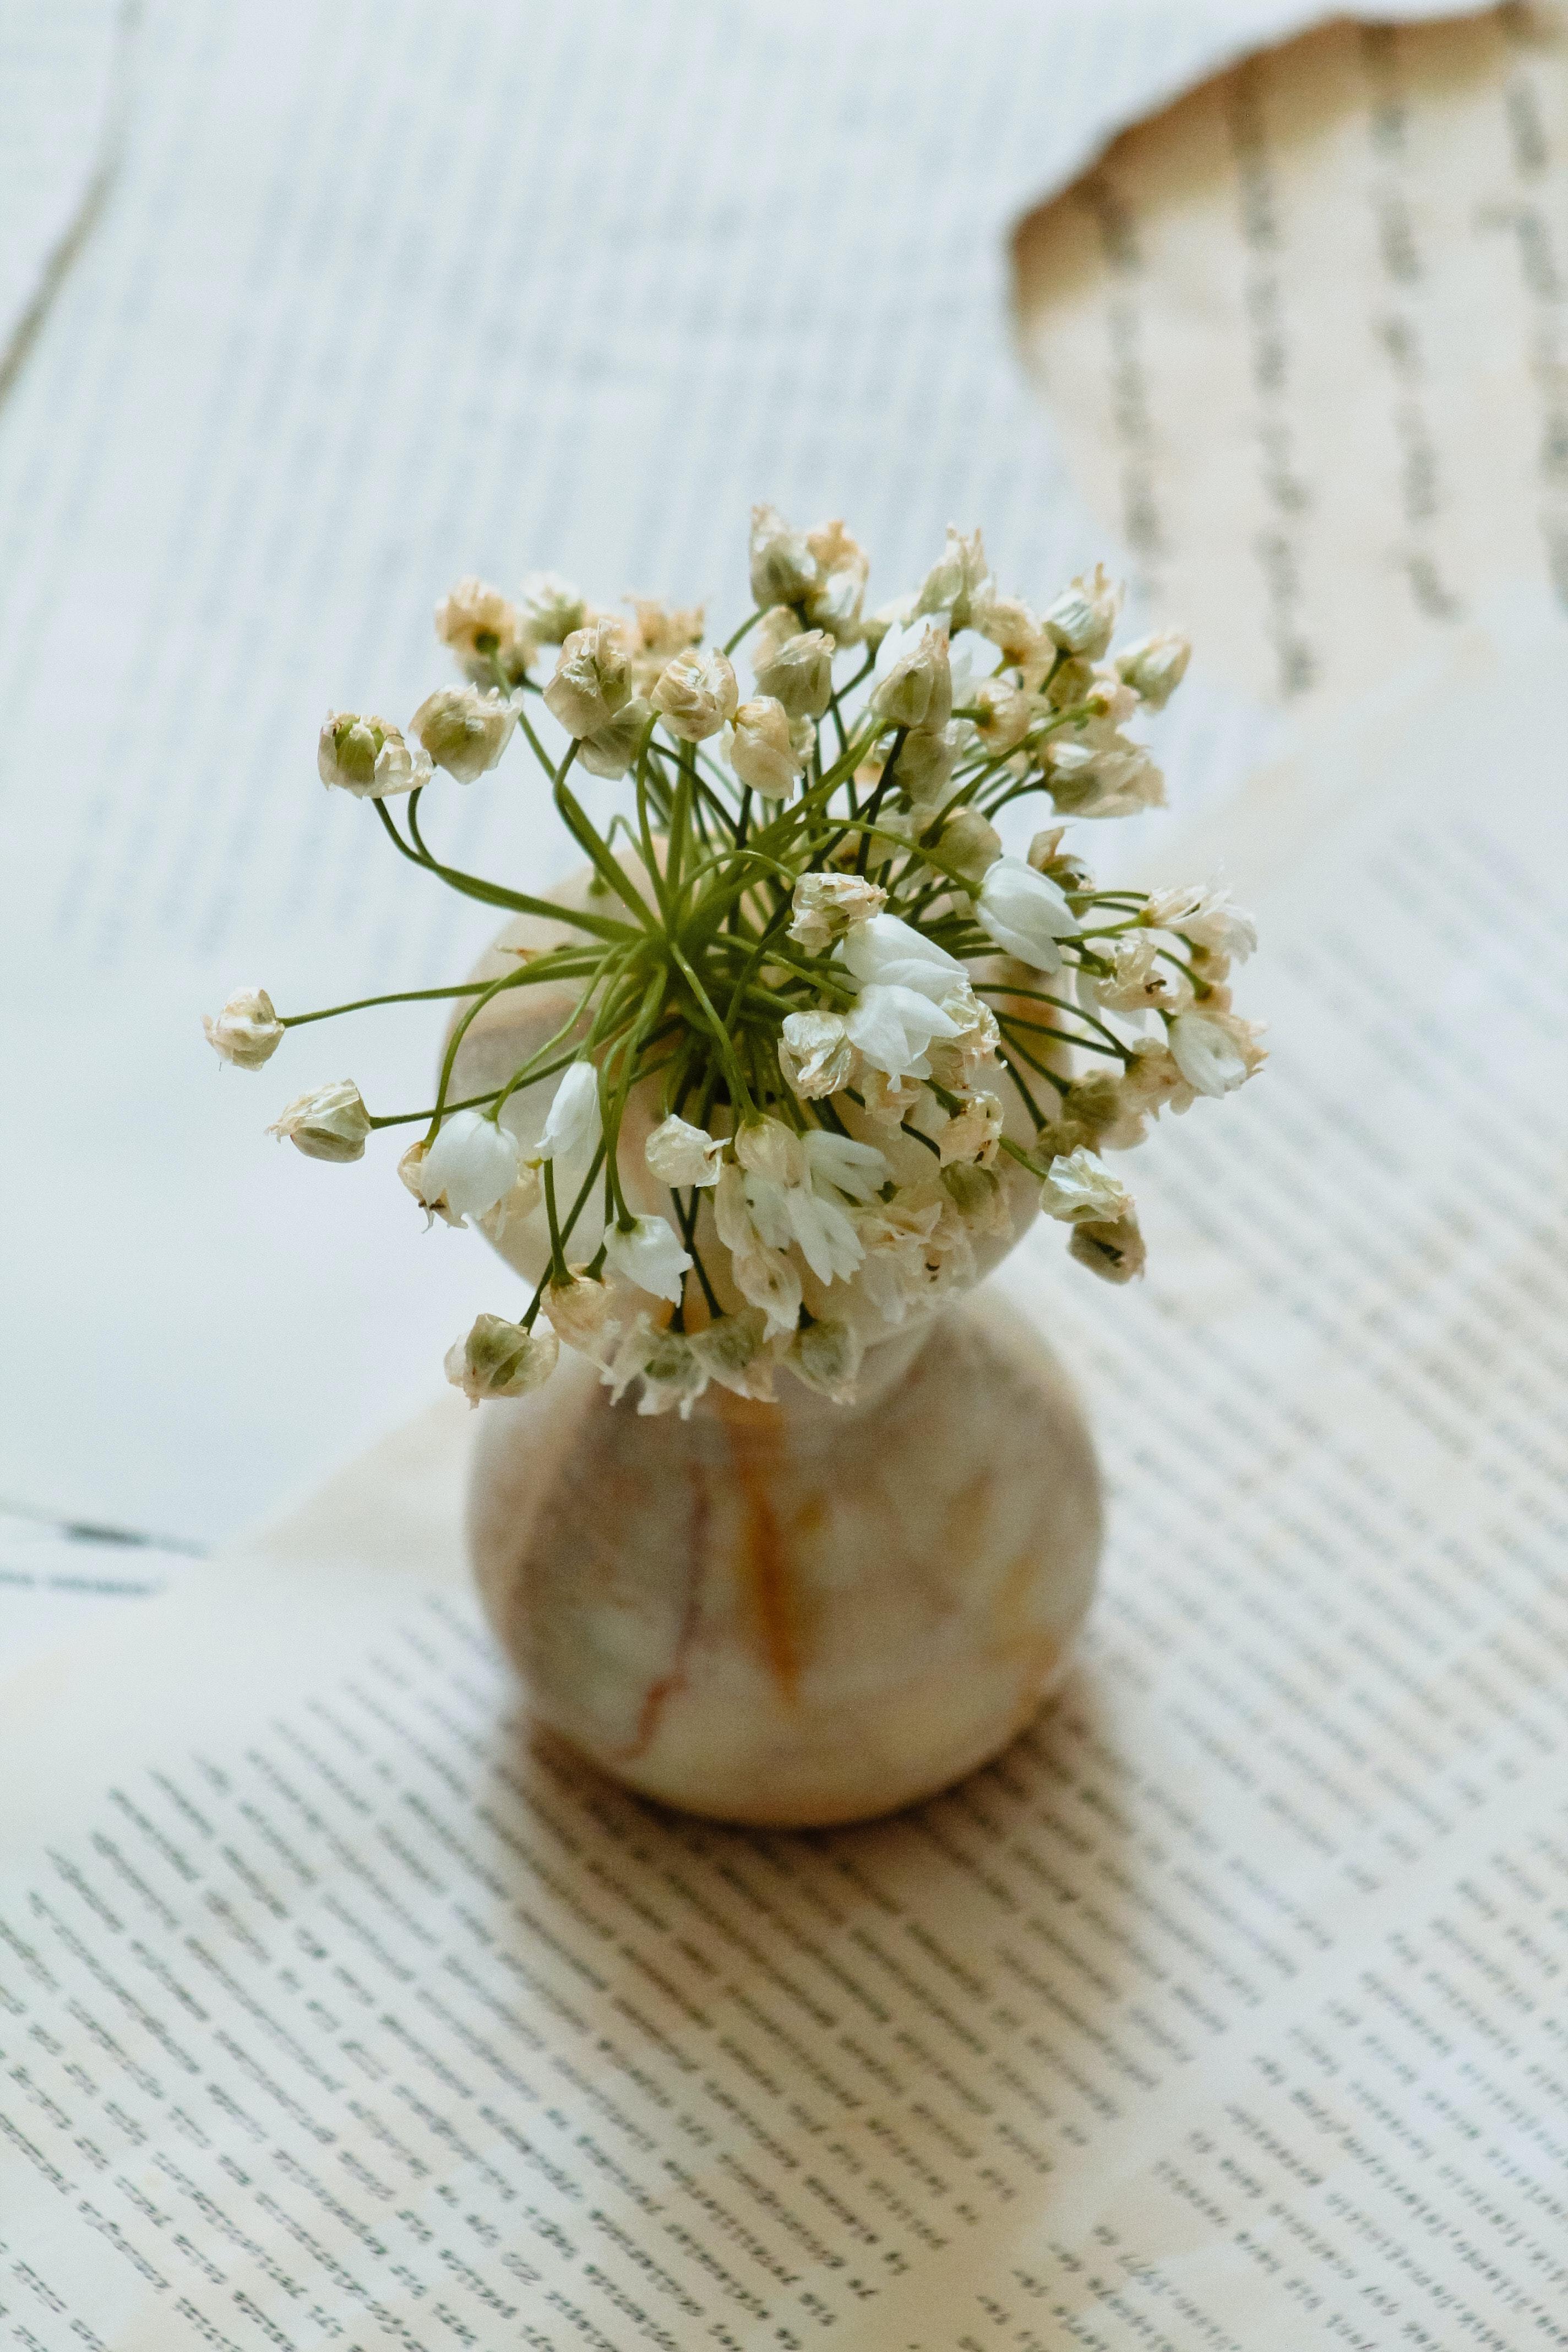 Why does my baby's breath smell sweet? 